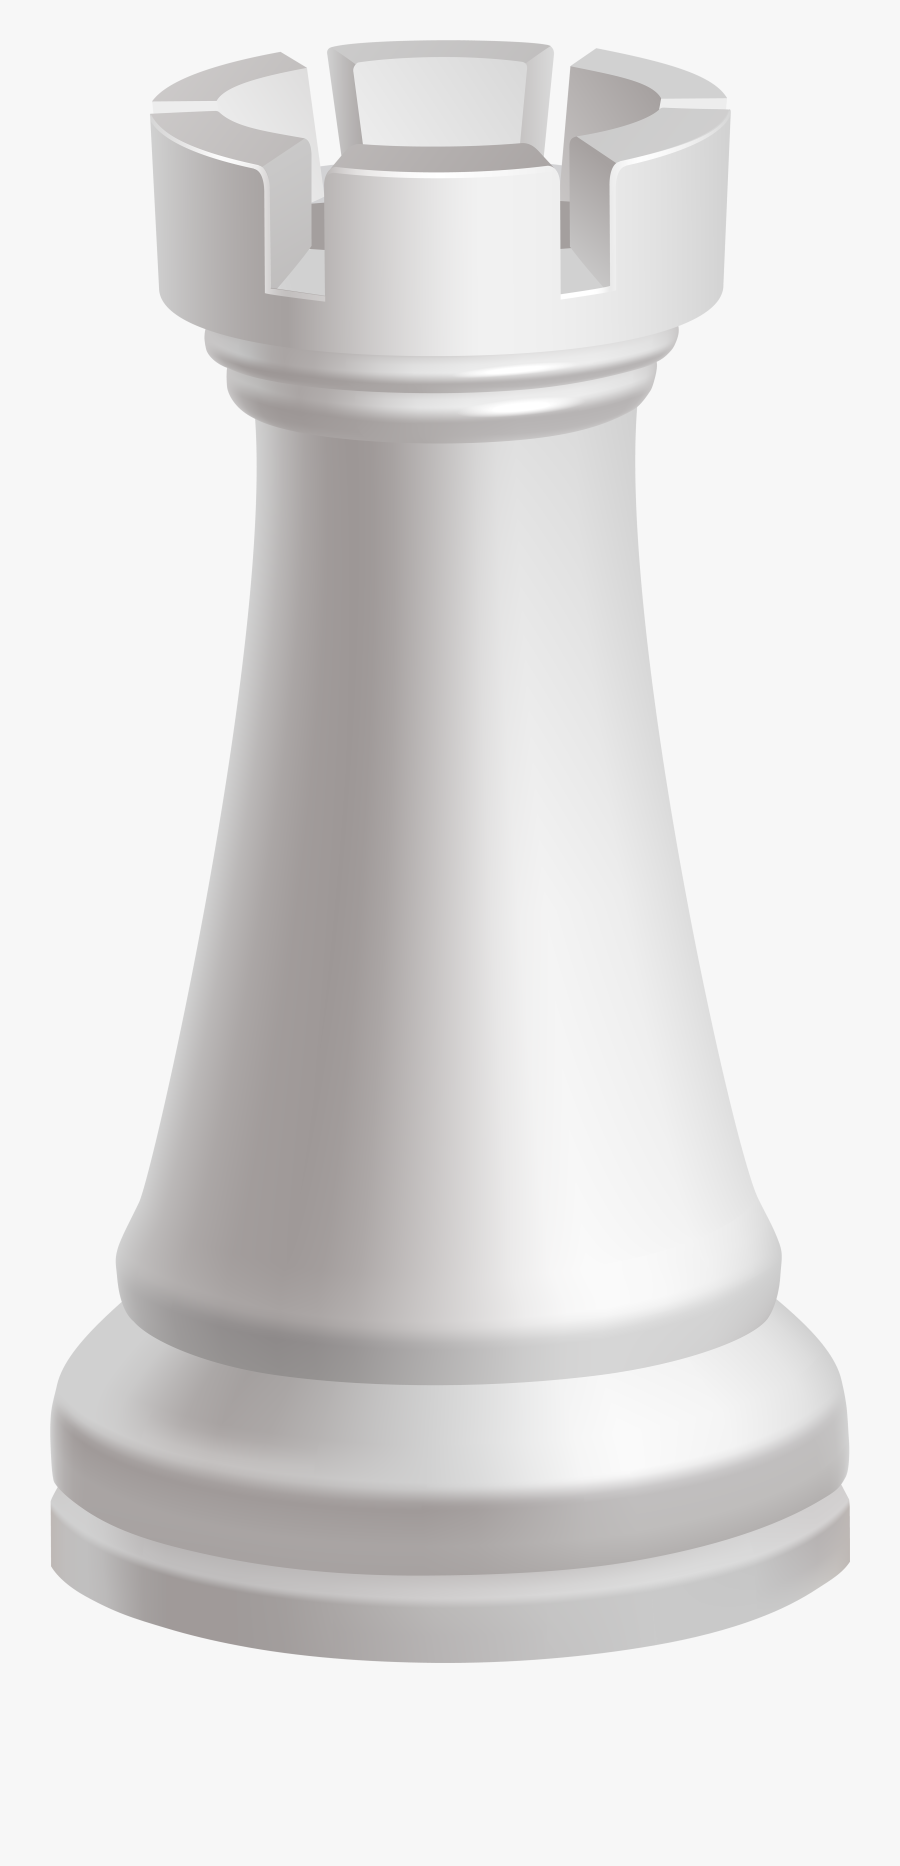 Rook White Chess Piece Png Clip Art - Chess Pieces Rook White, Transparent Clipart